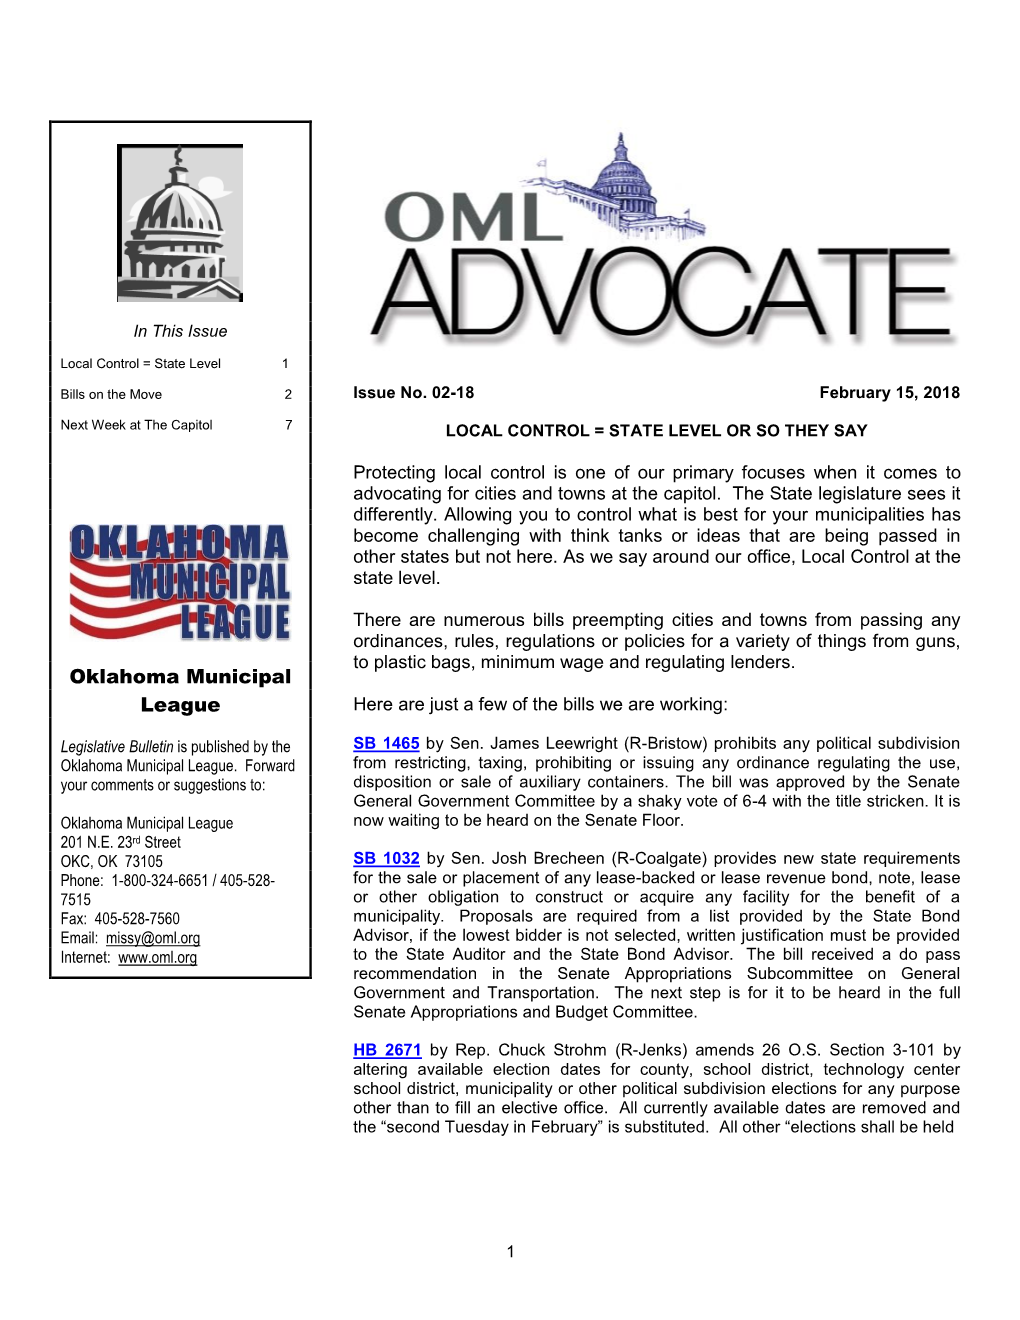 Oklahoma Municipal League Here Are Just a Few of the Bills We Are Working